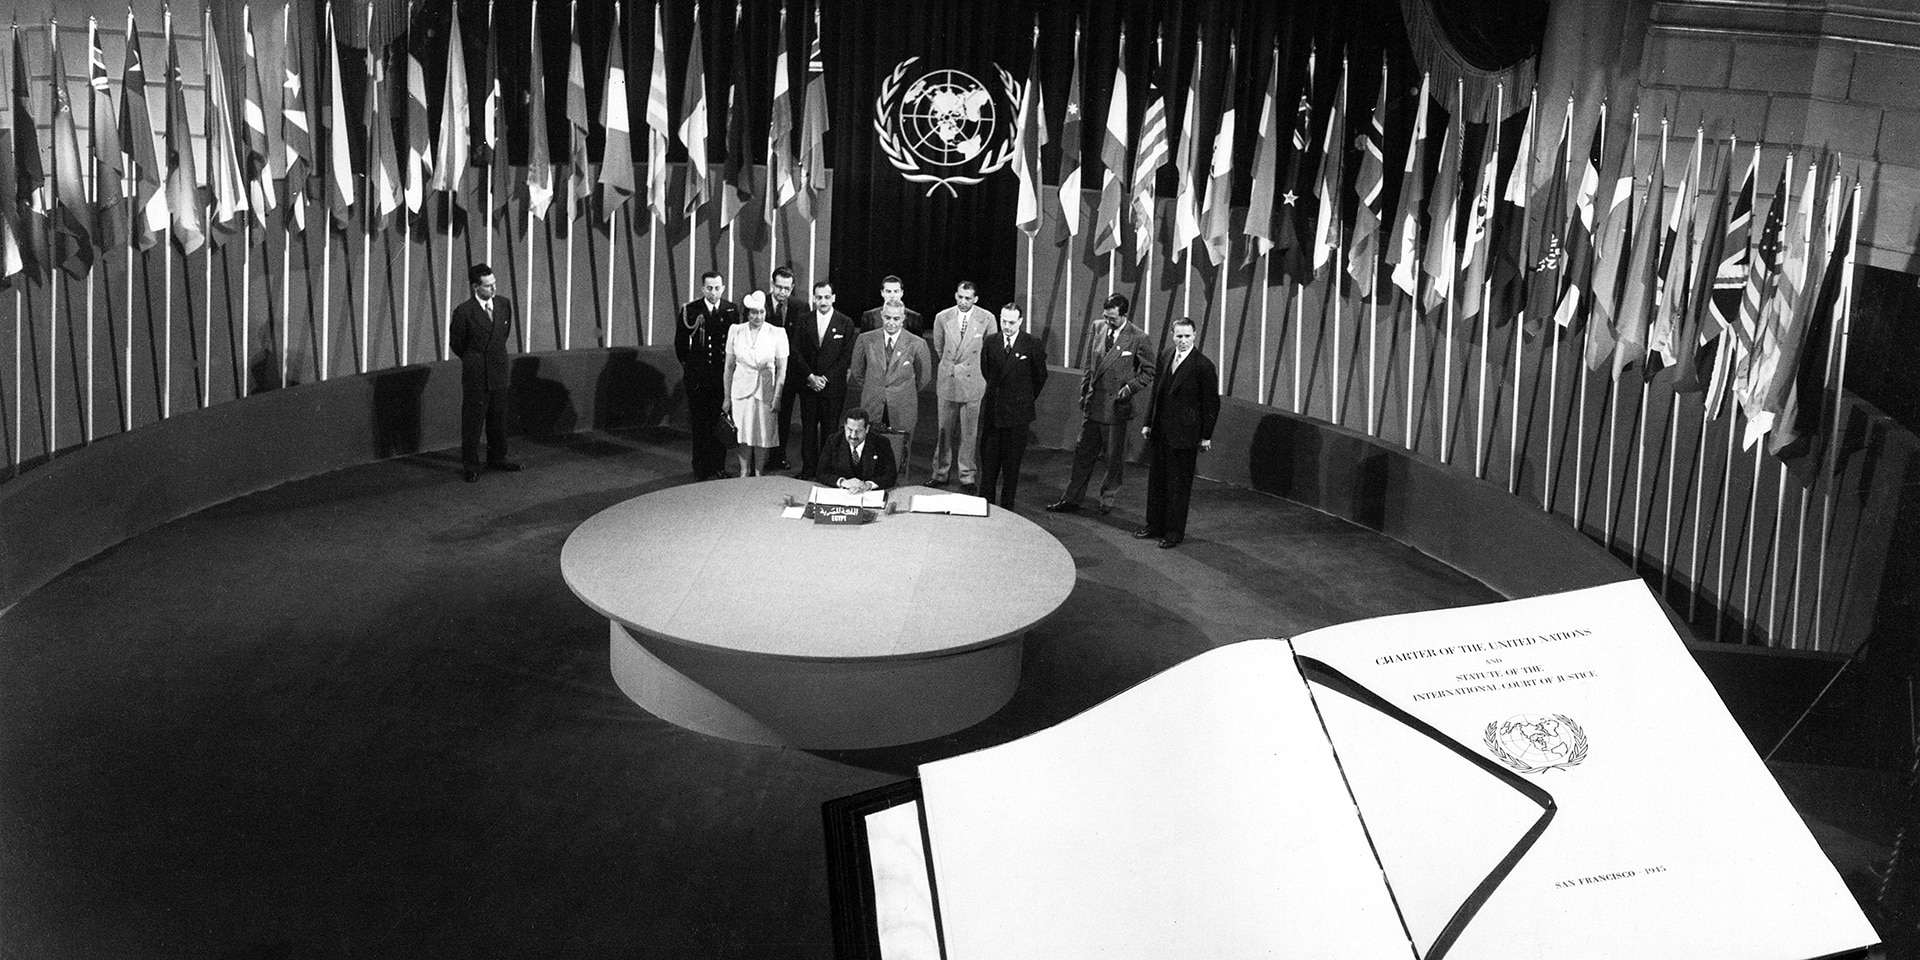  Egypt signing the UN Charter, with the Charter in the foreground. 